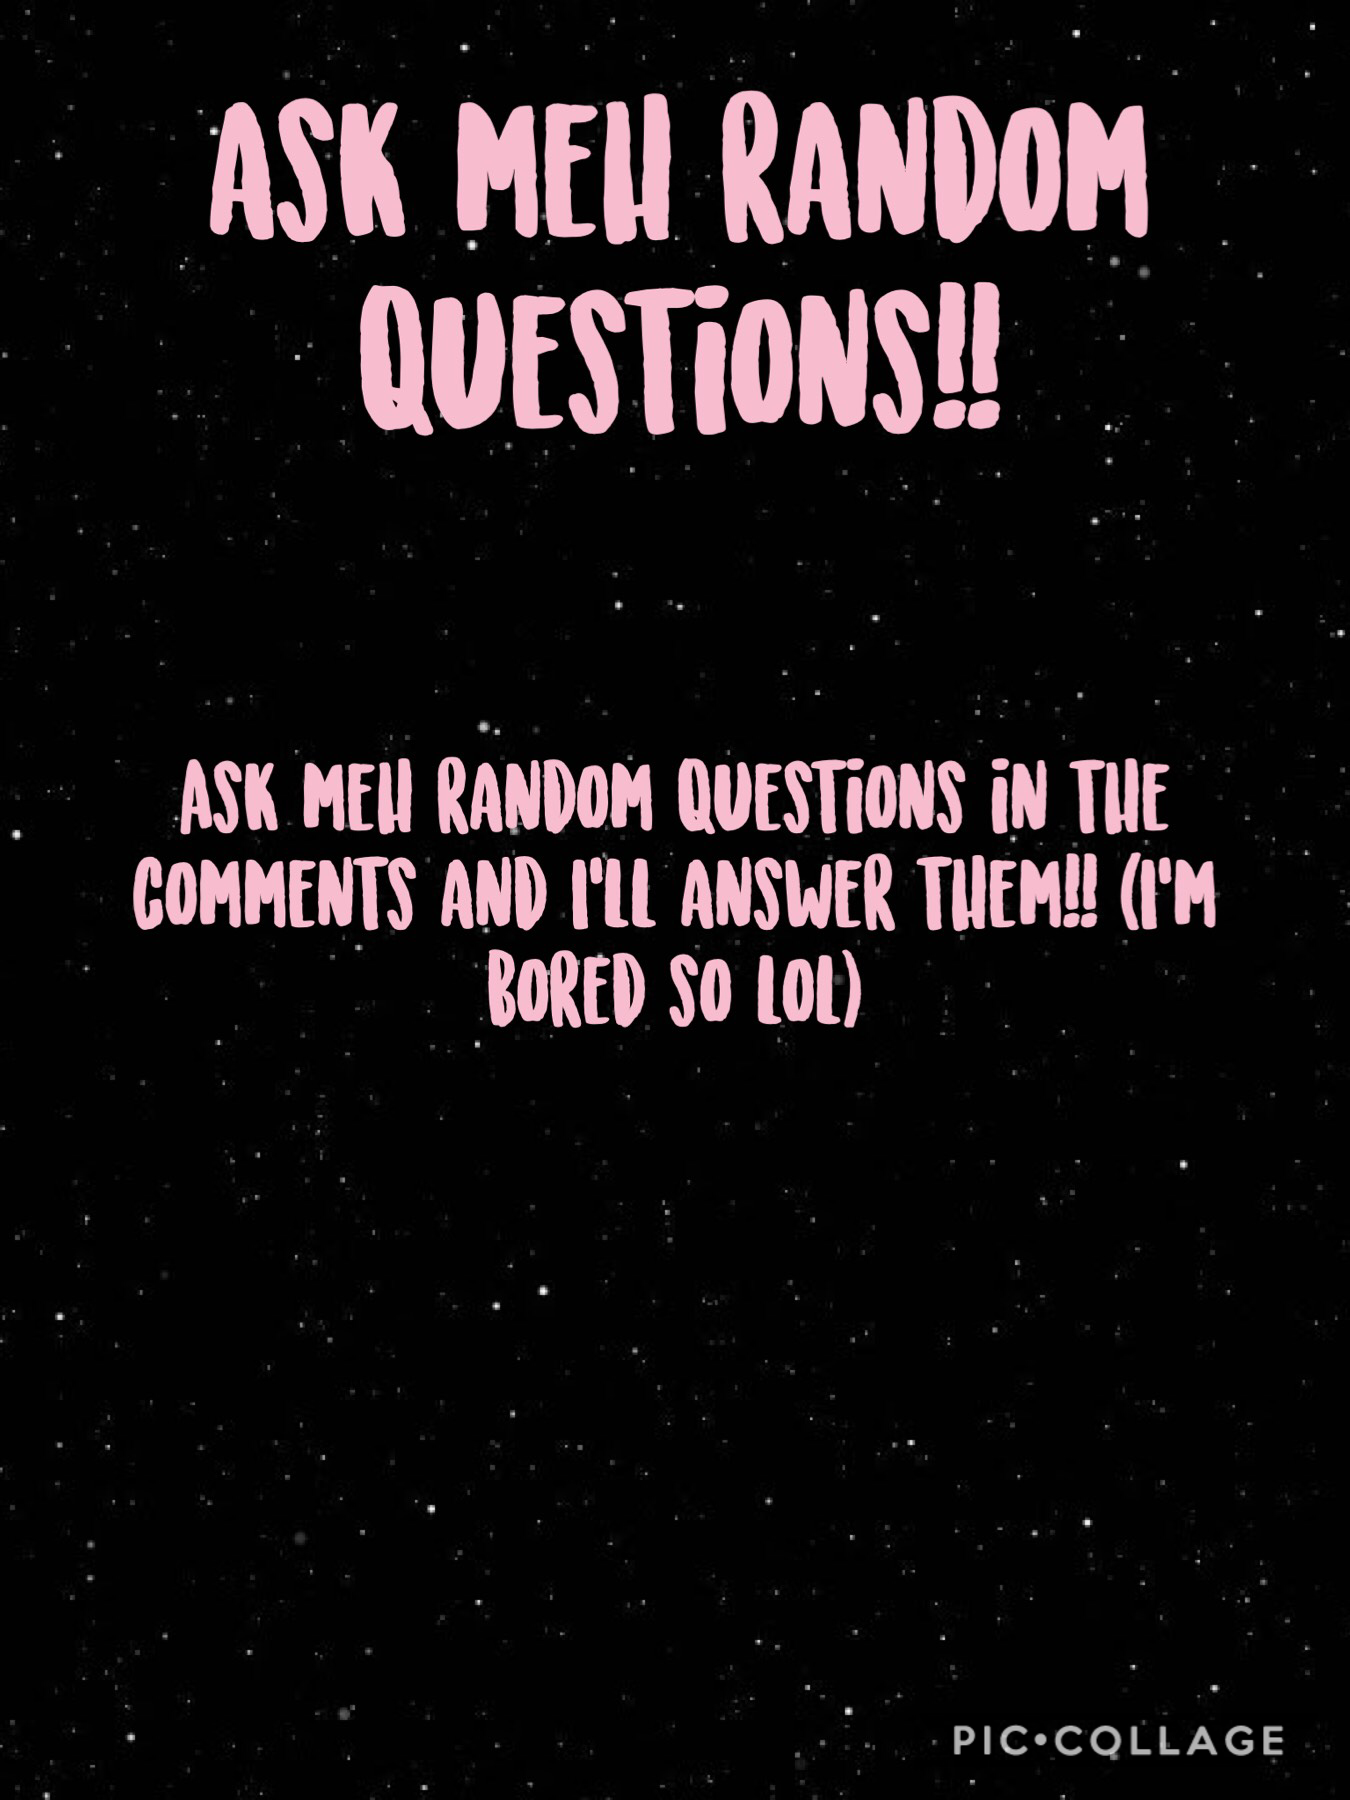 Tappy <3
ask me something totally random, dumb, embarrassing, funny, kewl, weird, whatever you want! (I’m doin a detailed collage rn so I’ll post that soon, too <3)